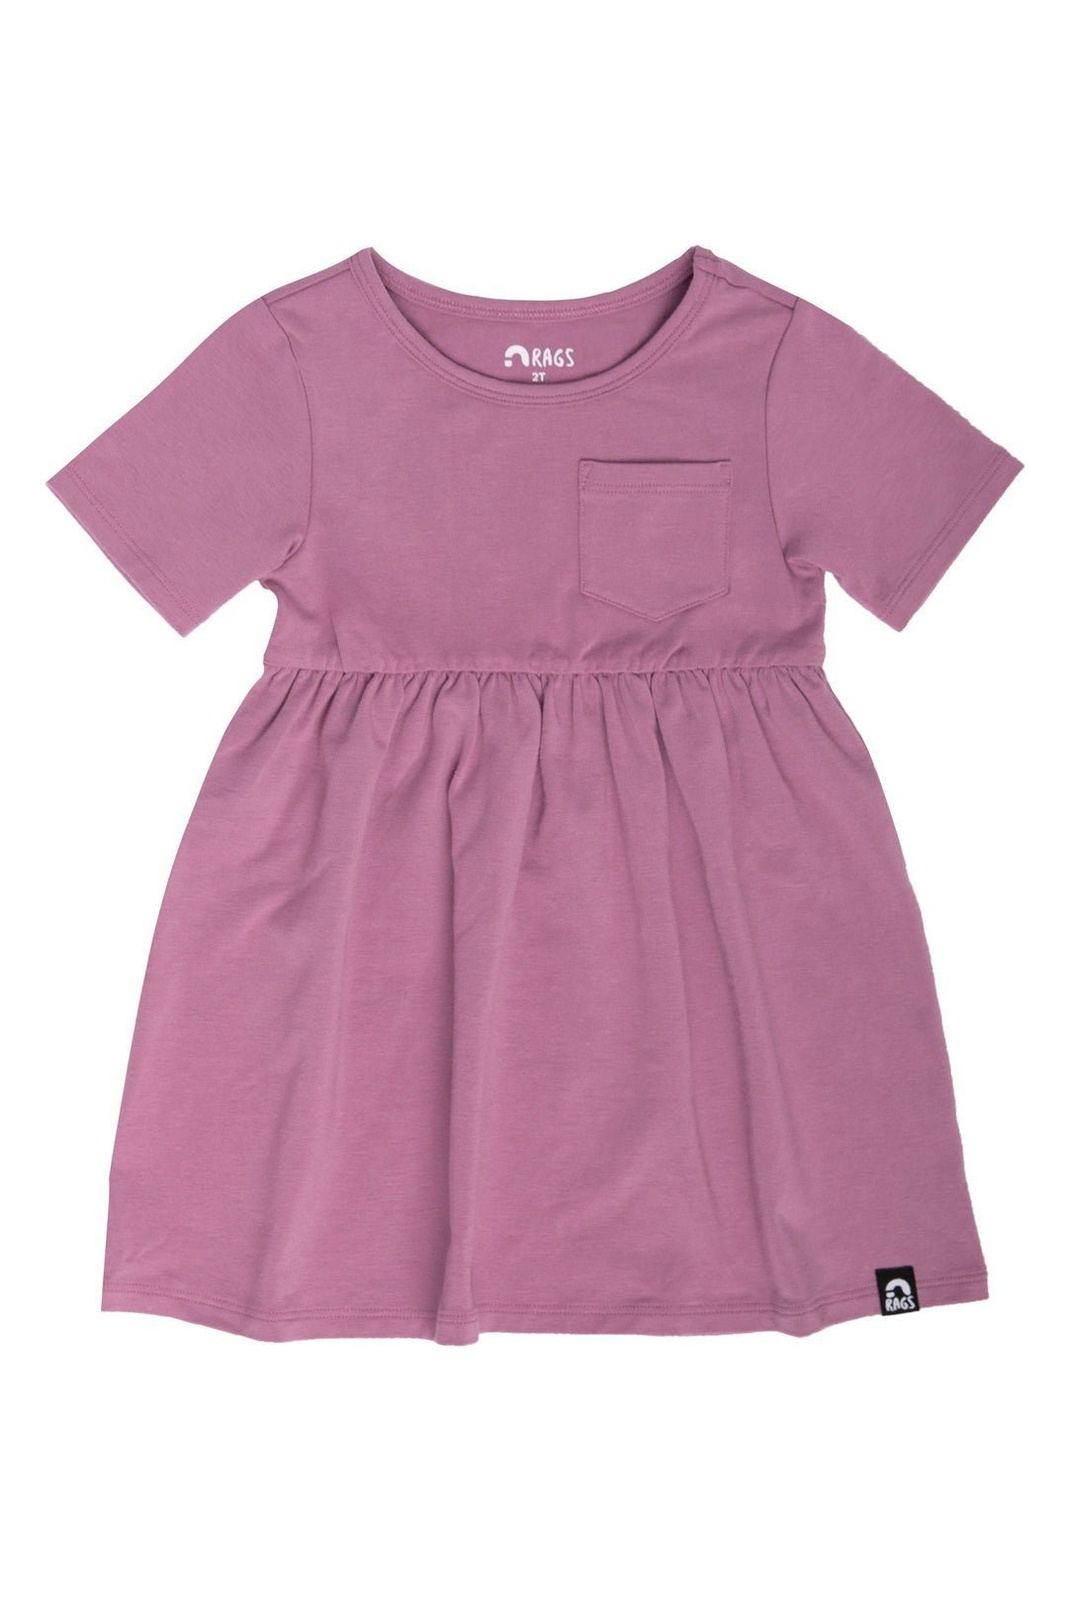 Essentials Short Sleeve with Chest Pocket Dress - 'Lavender' - Tea for Three: A Children's Boutique-New Arrivals-Tea for Three: A Children's Boutique